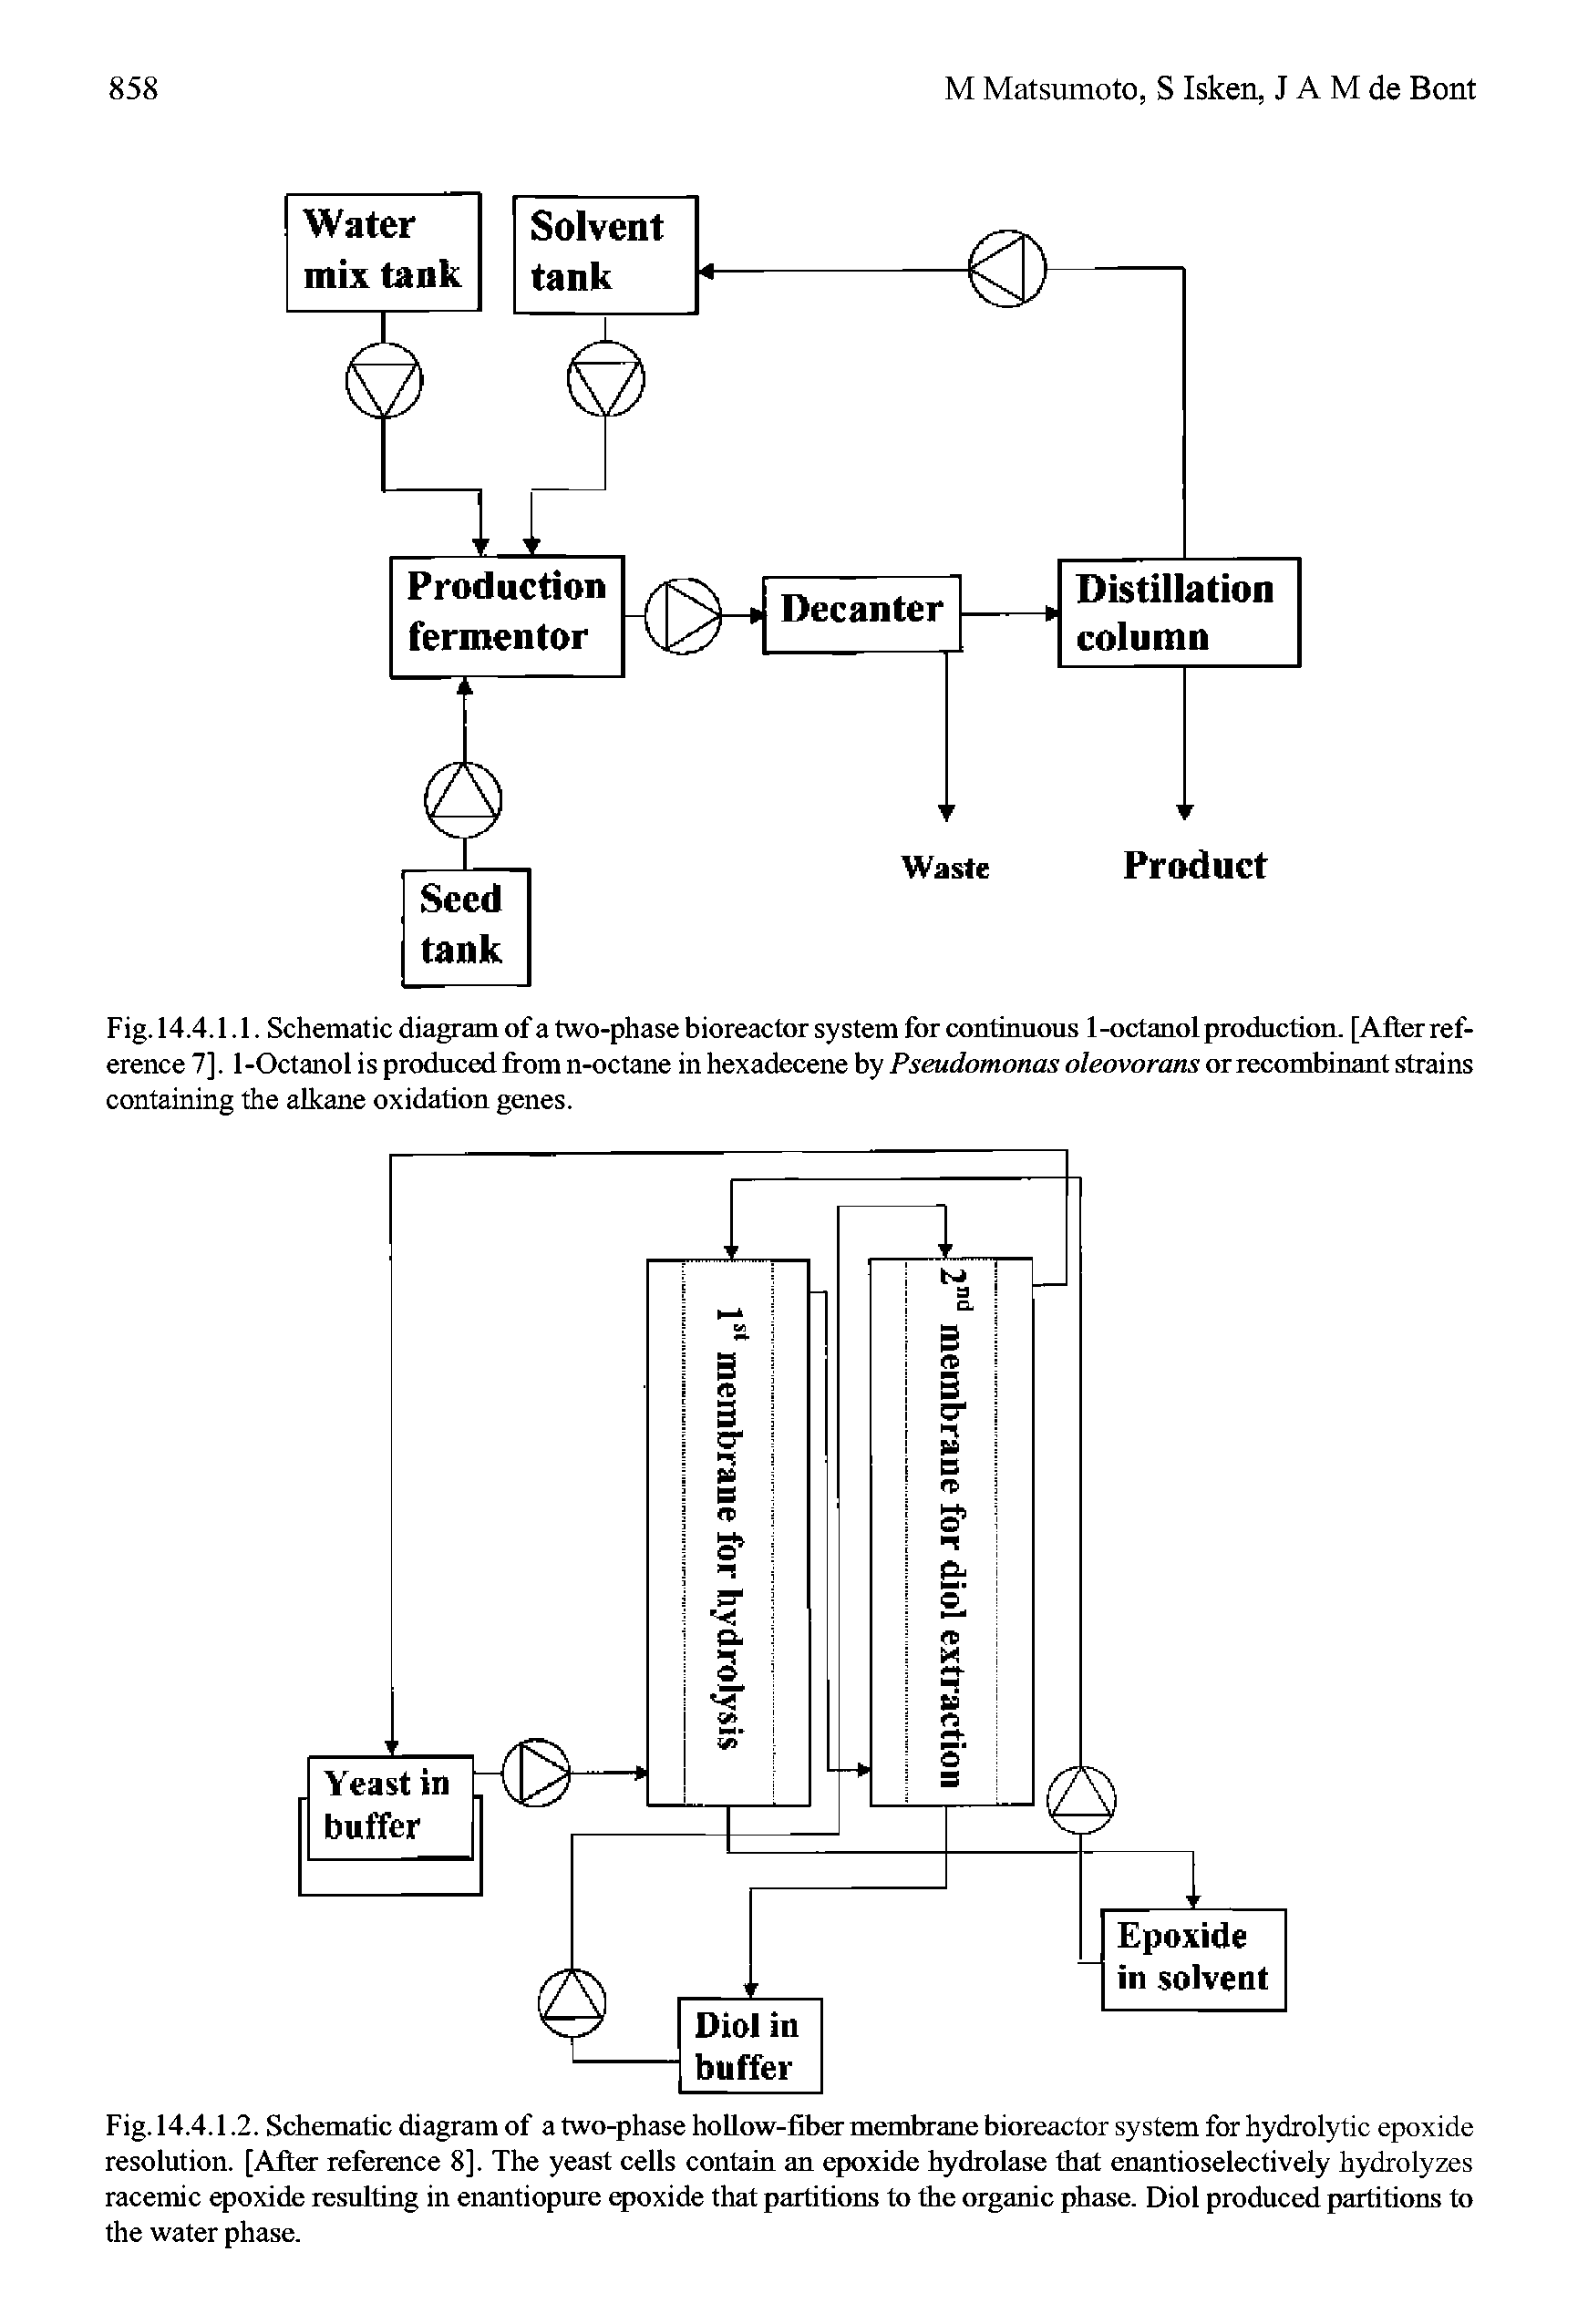 Fig. 14.4.1.2. Schematic diagram of a two-phase hollow-fiber membrane bioreactor system for hydrolytic epoxide resolution. [After reference 8]. The yeast cells contain an epoxide hydrolase that enantioselectively hydrolyzes racemic epoxide resulting in enantiopure epoxide that partitions to the organic phase. Diol produced partitions to the water phase.